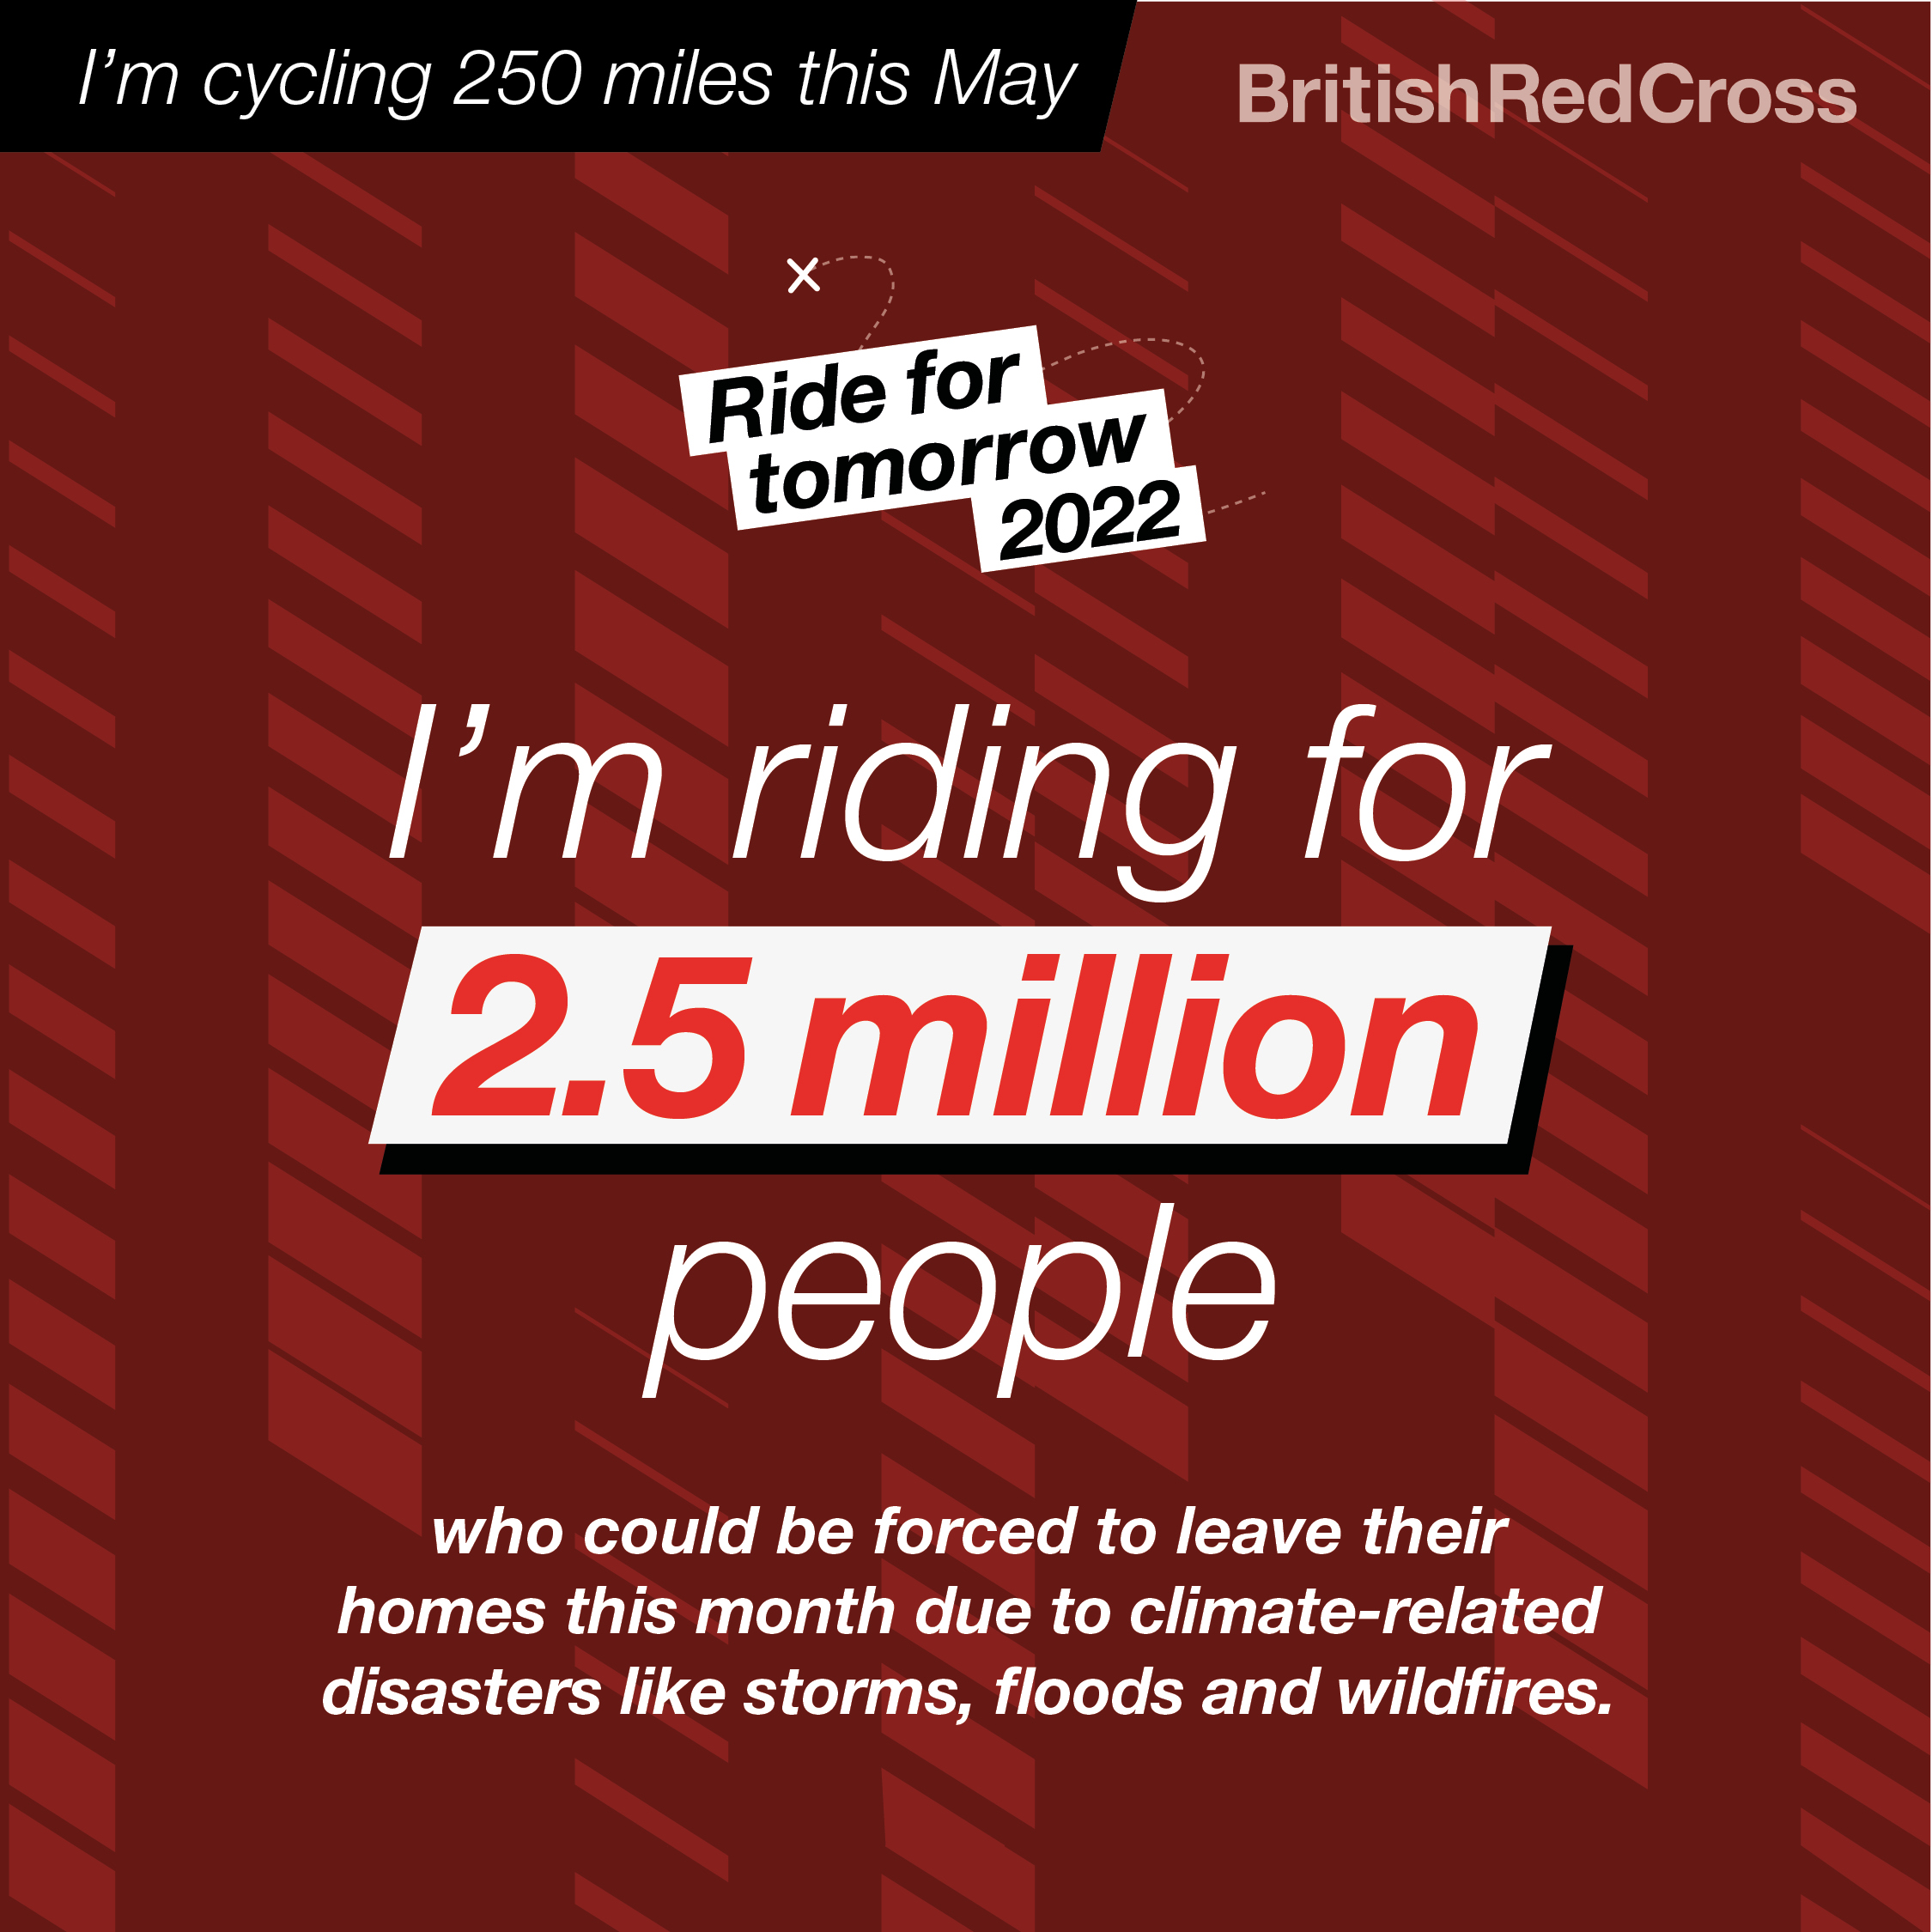 Text on a red background. I'm cycling 250 miles this May. I'm riding for 2.5 million people who could be forced to leave their homes this month due to climate related disasters like storms, floods and wildfires'.